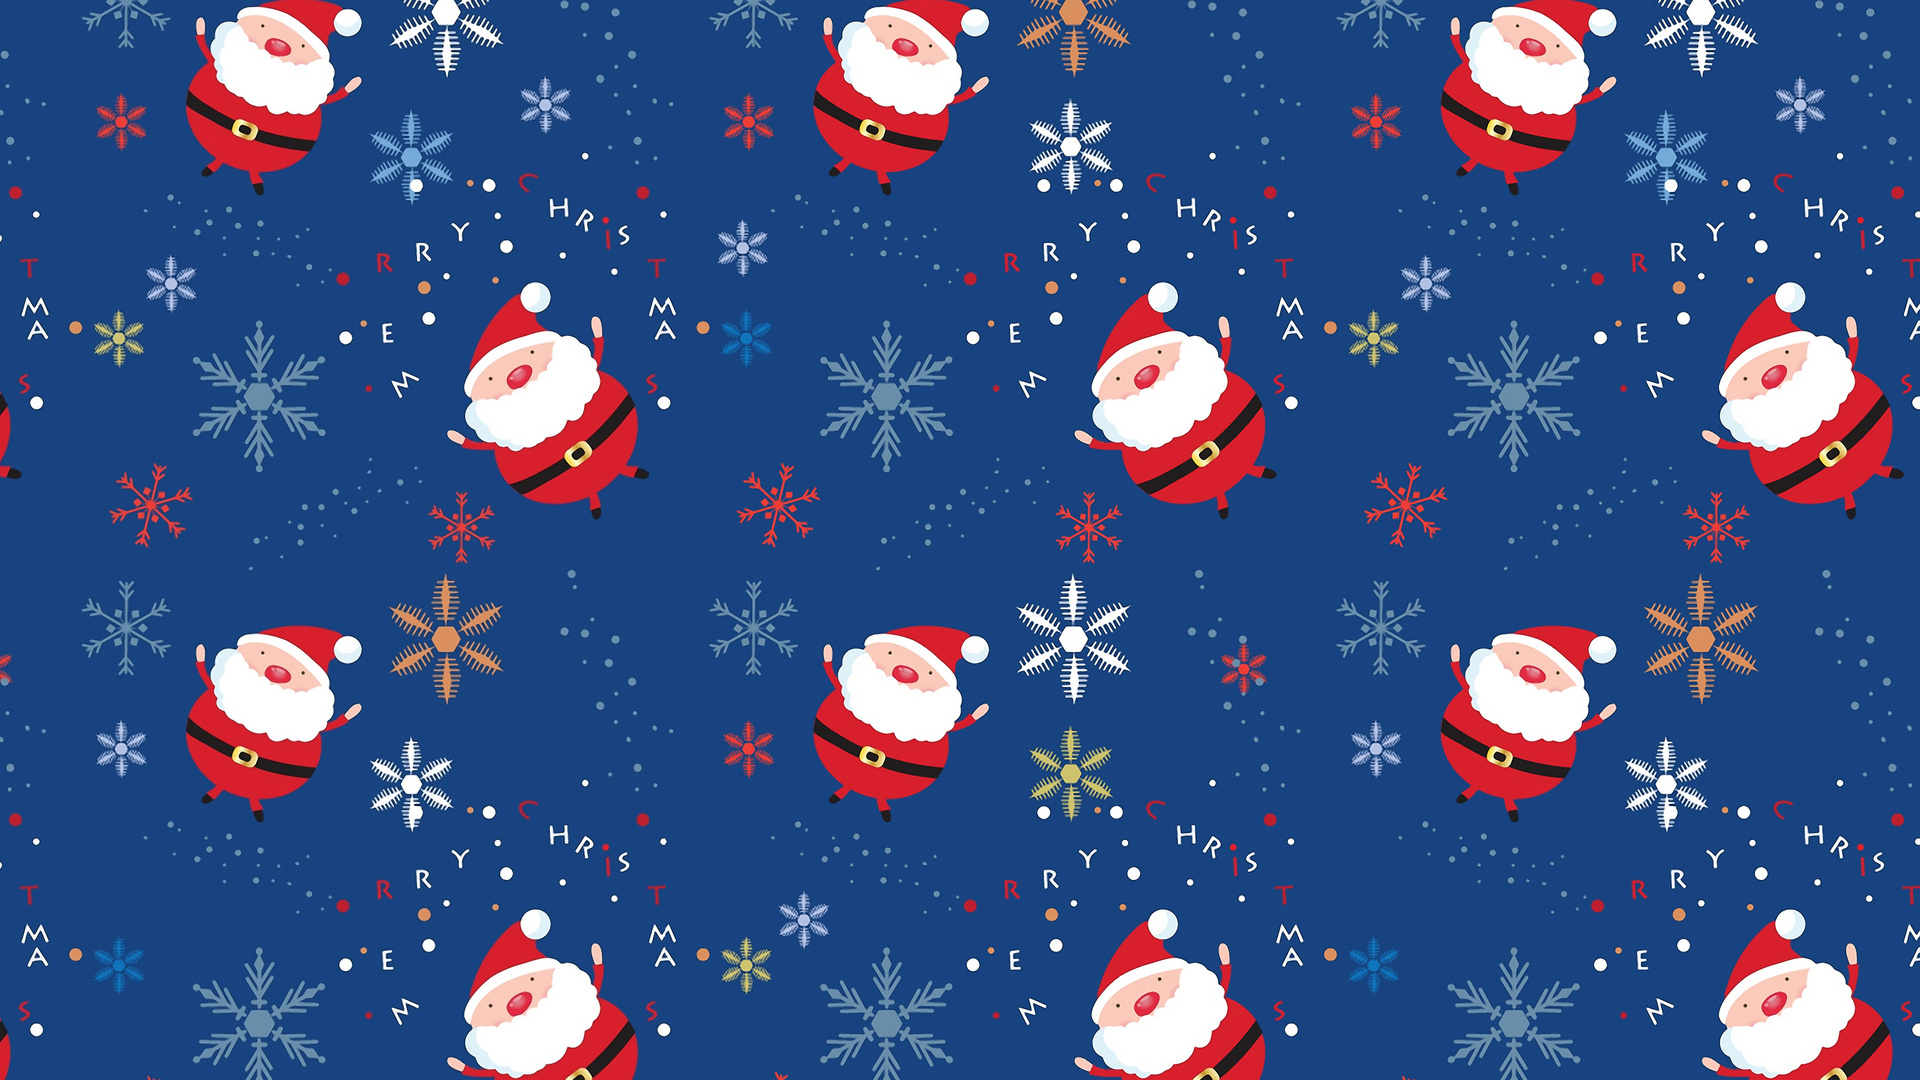 Cute Christmas Background